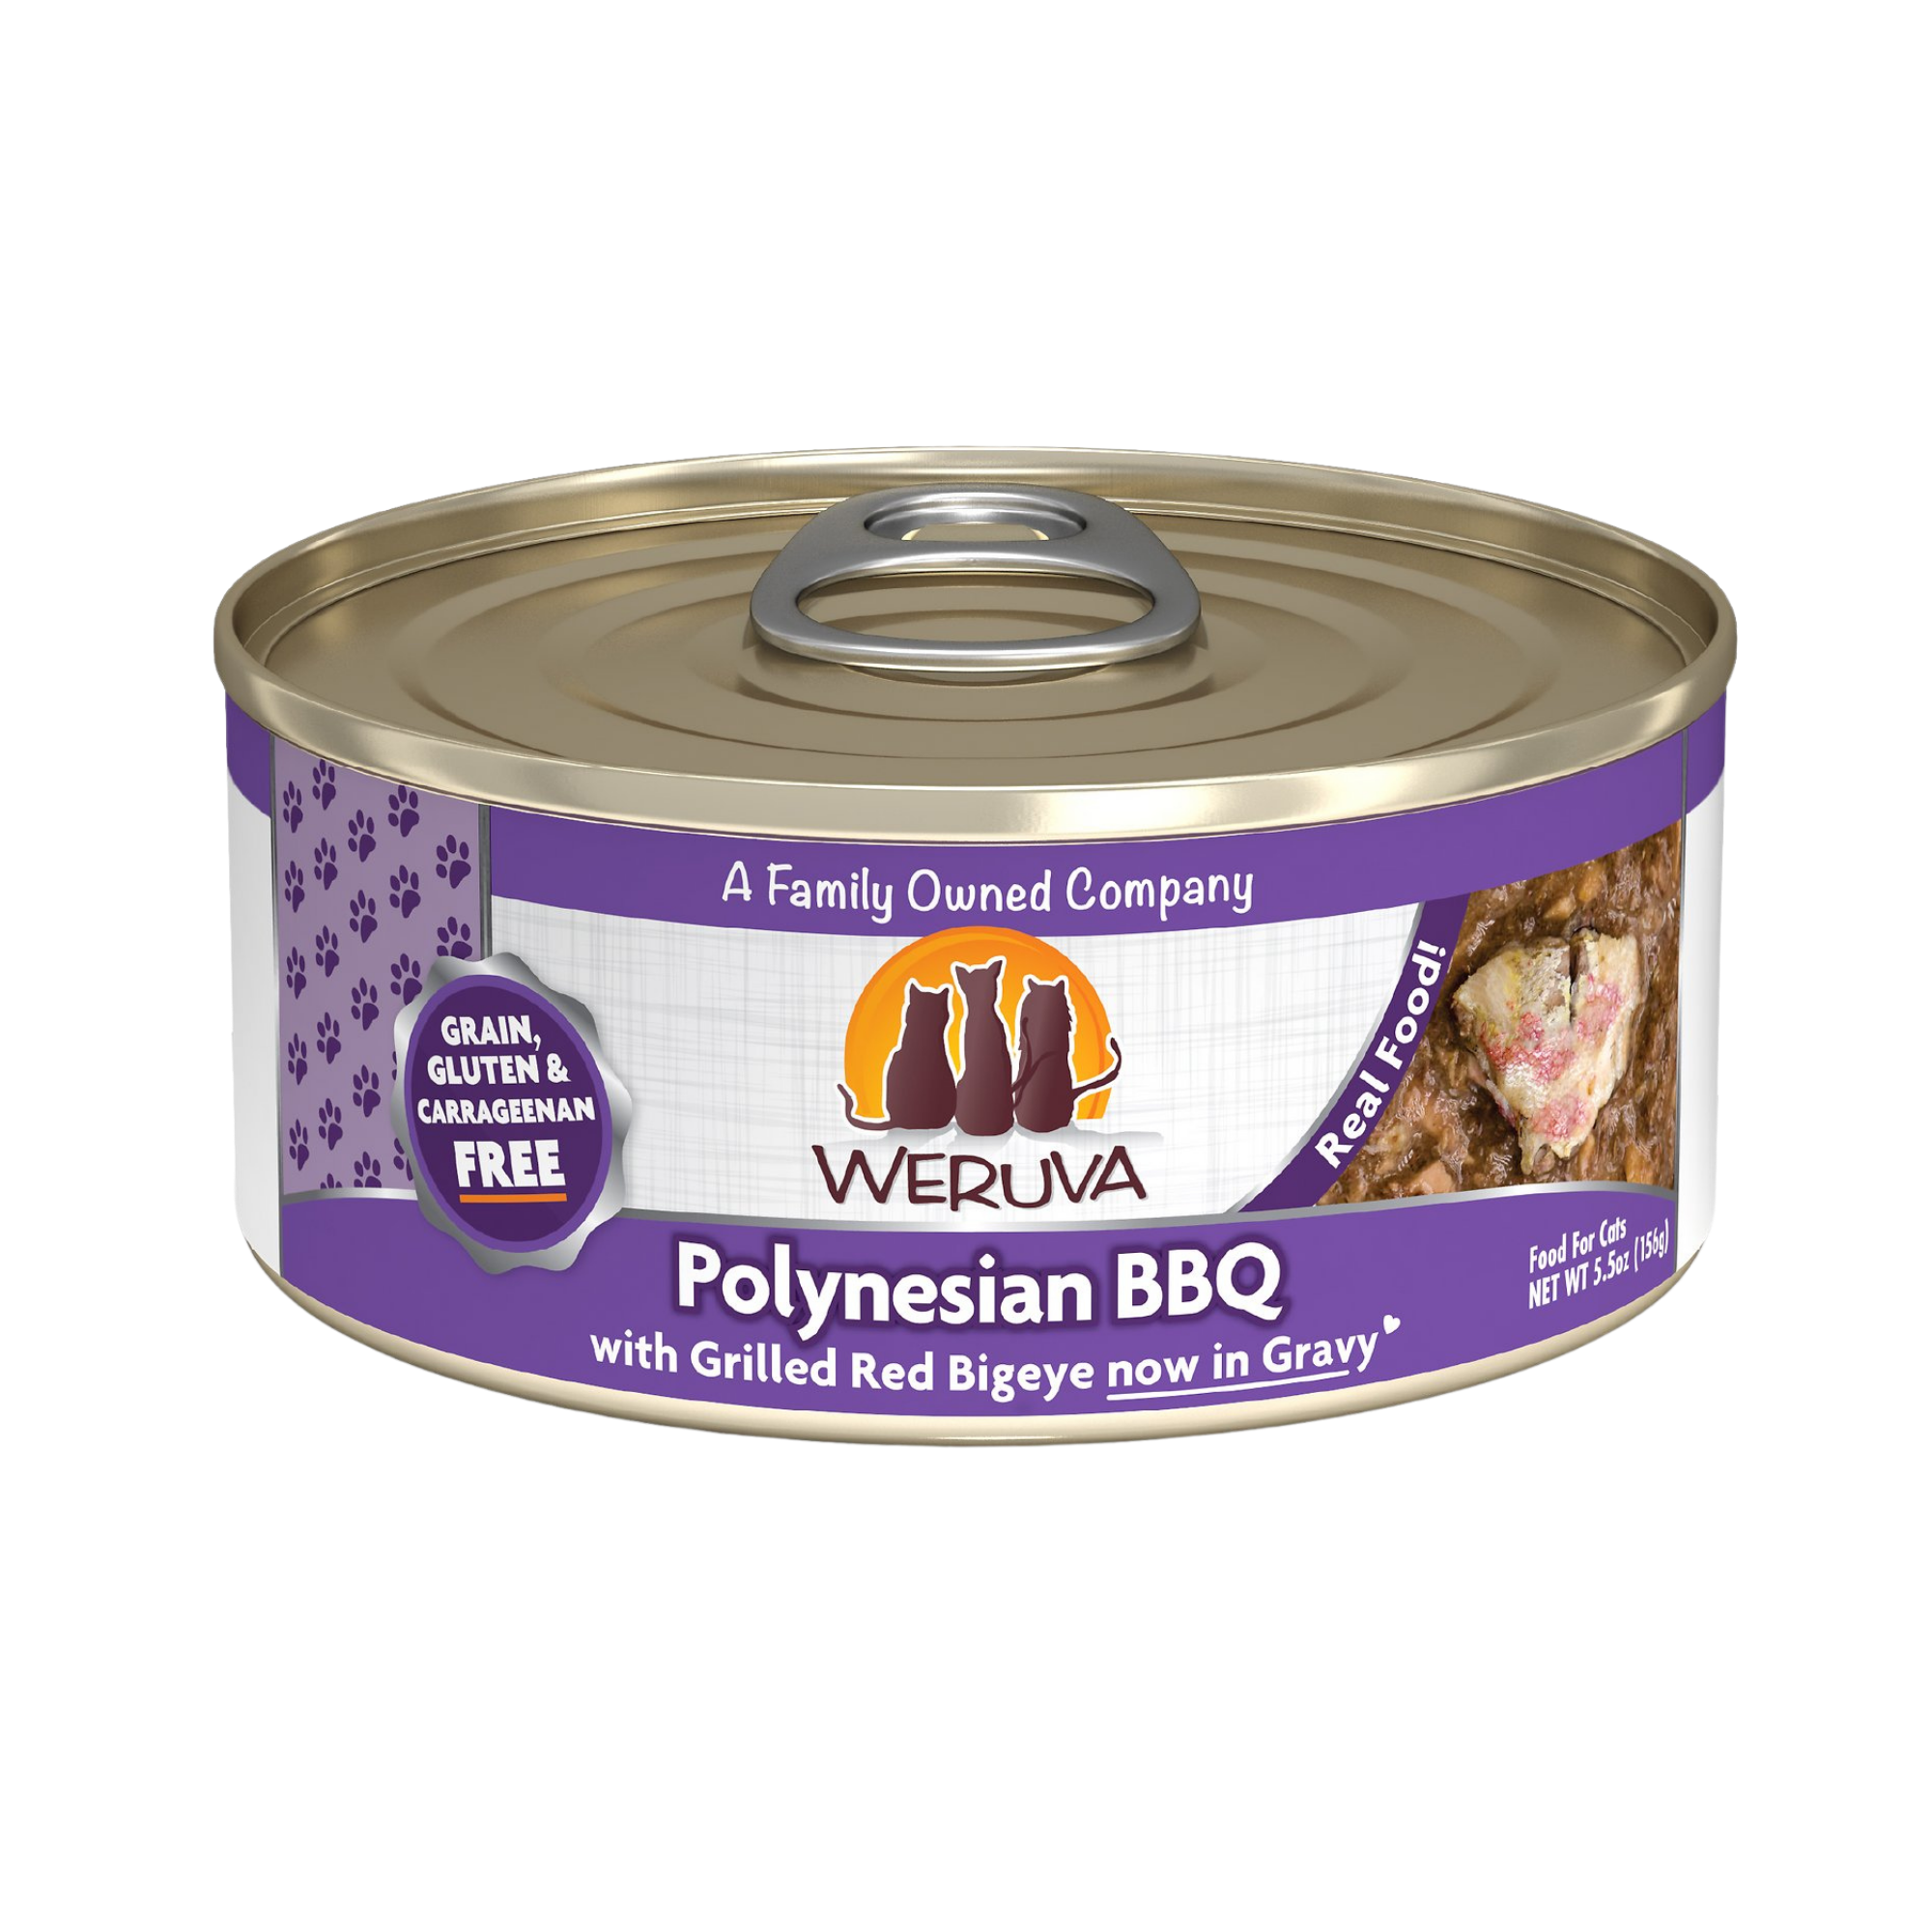 Weruva Polynesian BBQ with Grilled Red Bigeye Canned Cat Food - Mutts & Co.